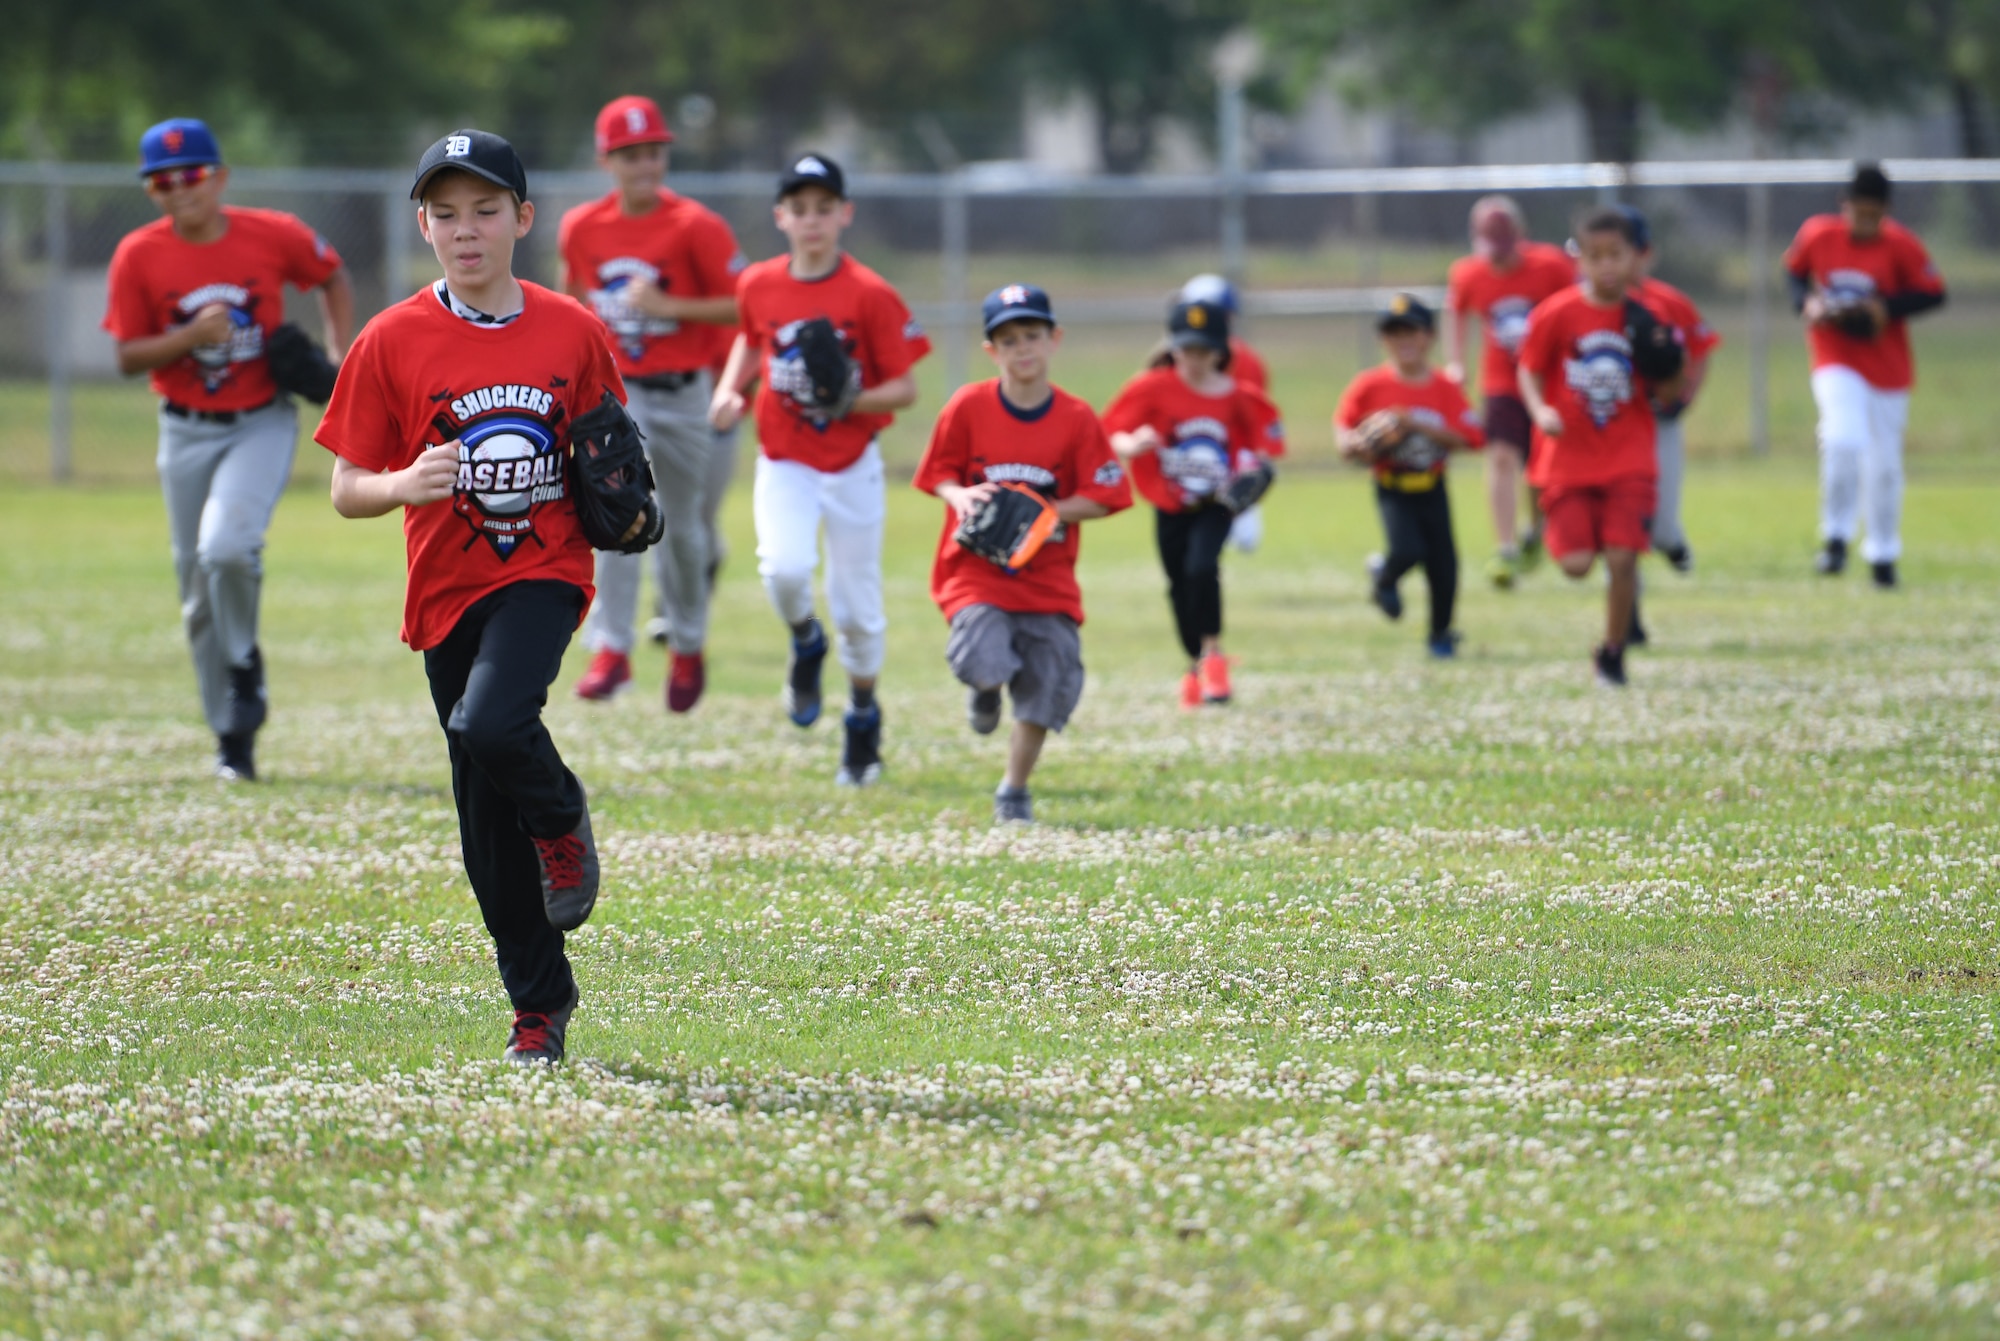 Keesler children run warm-up laps during the Biloxi Shuckers Youth Baseball Clinic on the youth center baseball field at Keesler Air Force Base, Mississippi, May 5, 2018. More than 20 children attended the clinic that provided hitting, pitching, base running and fielding instruction from members of the Biloxi Shuckers minor league baseball team. (U.S. Air Force photo by Kemberly Groue)